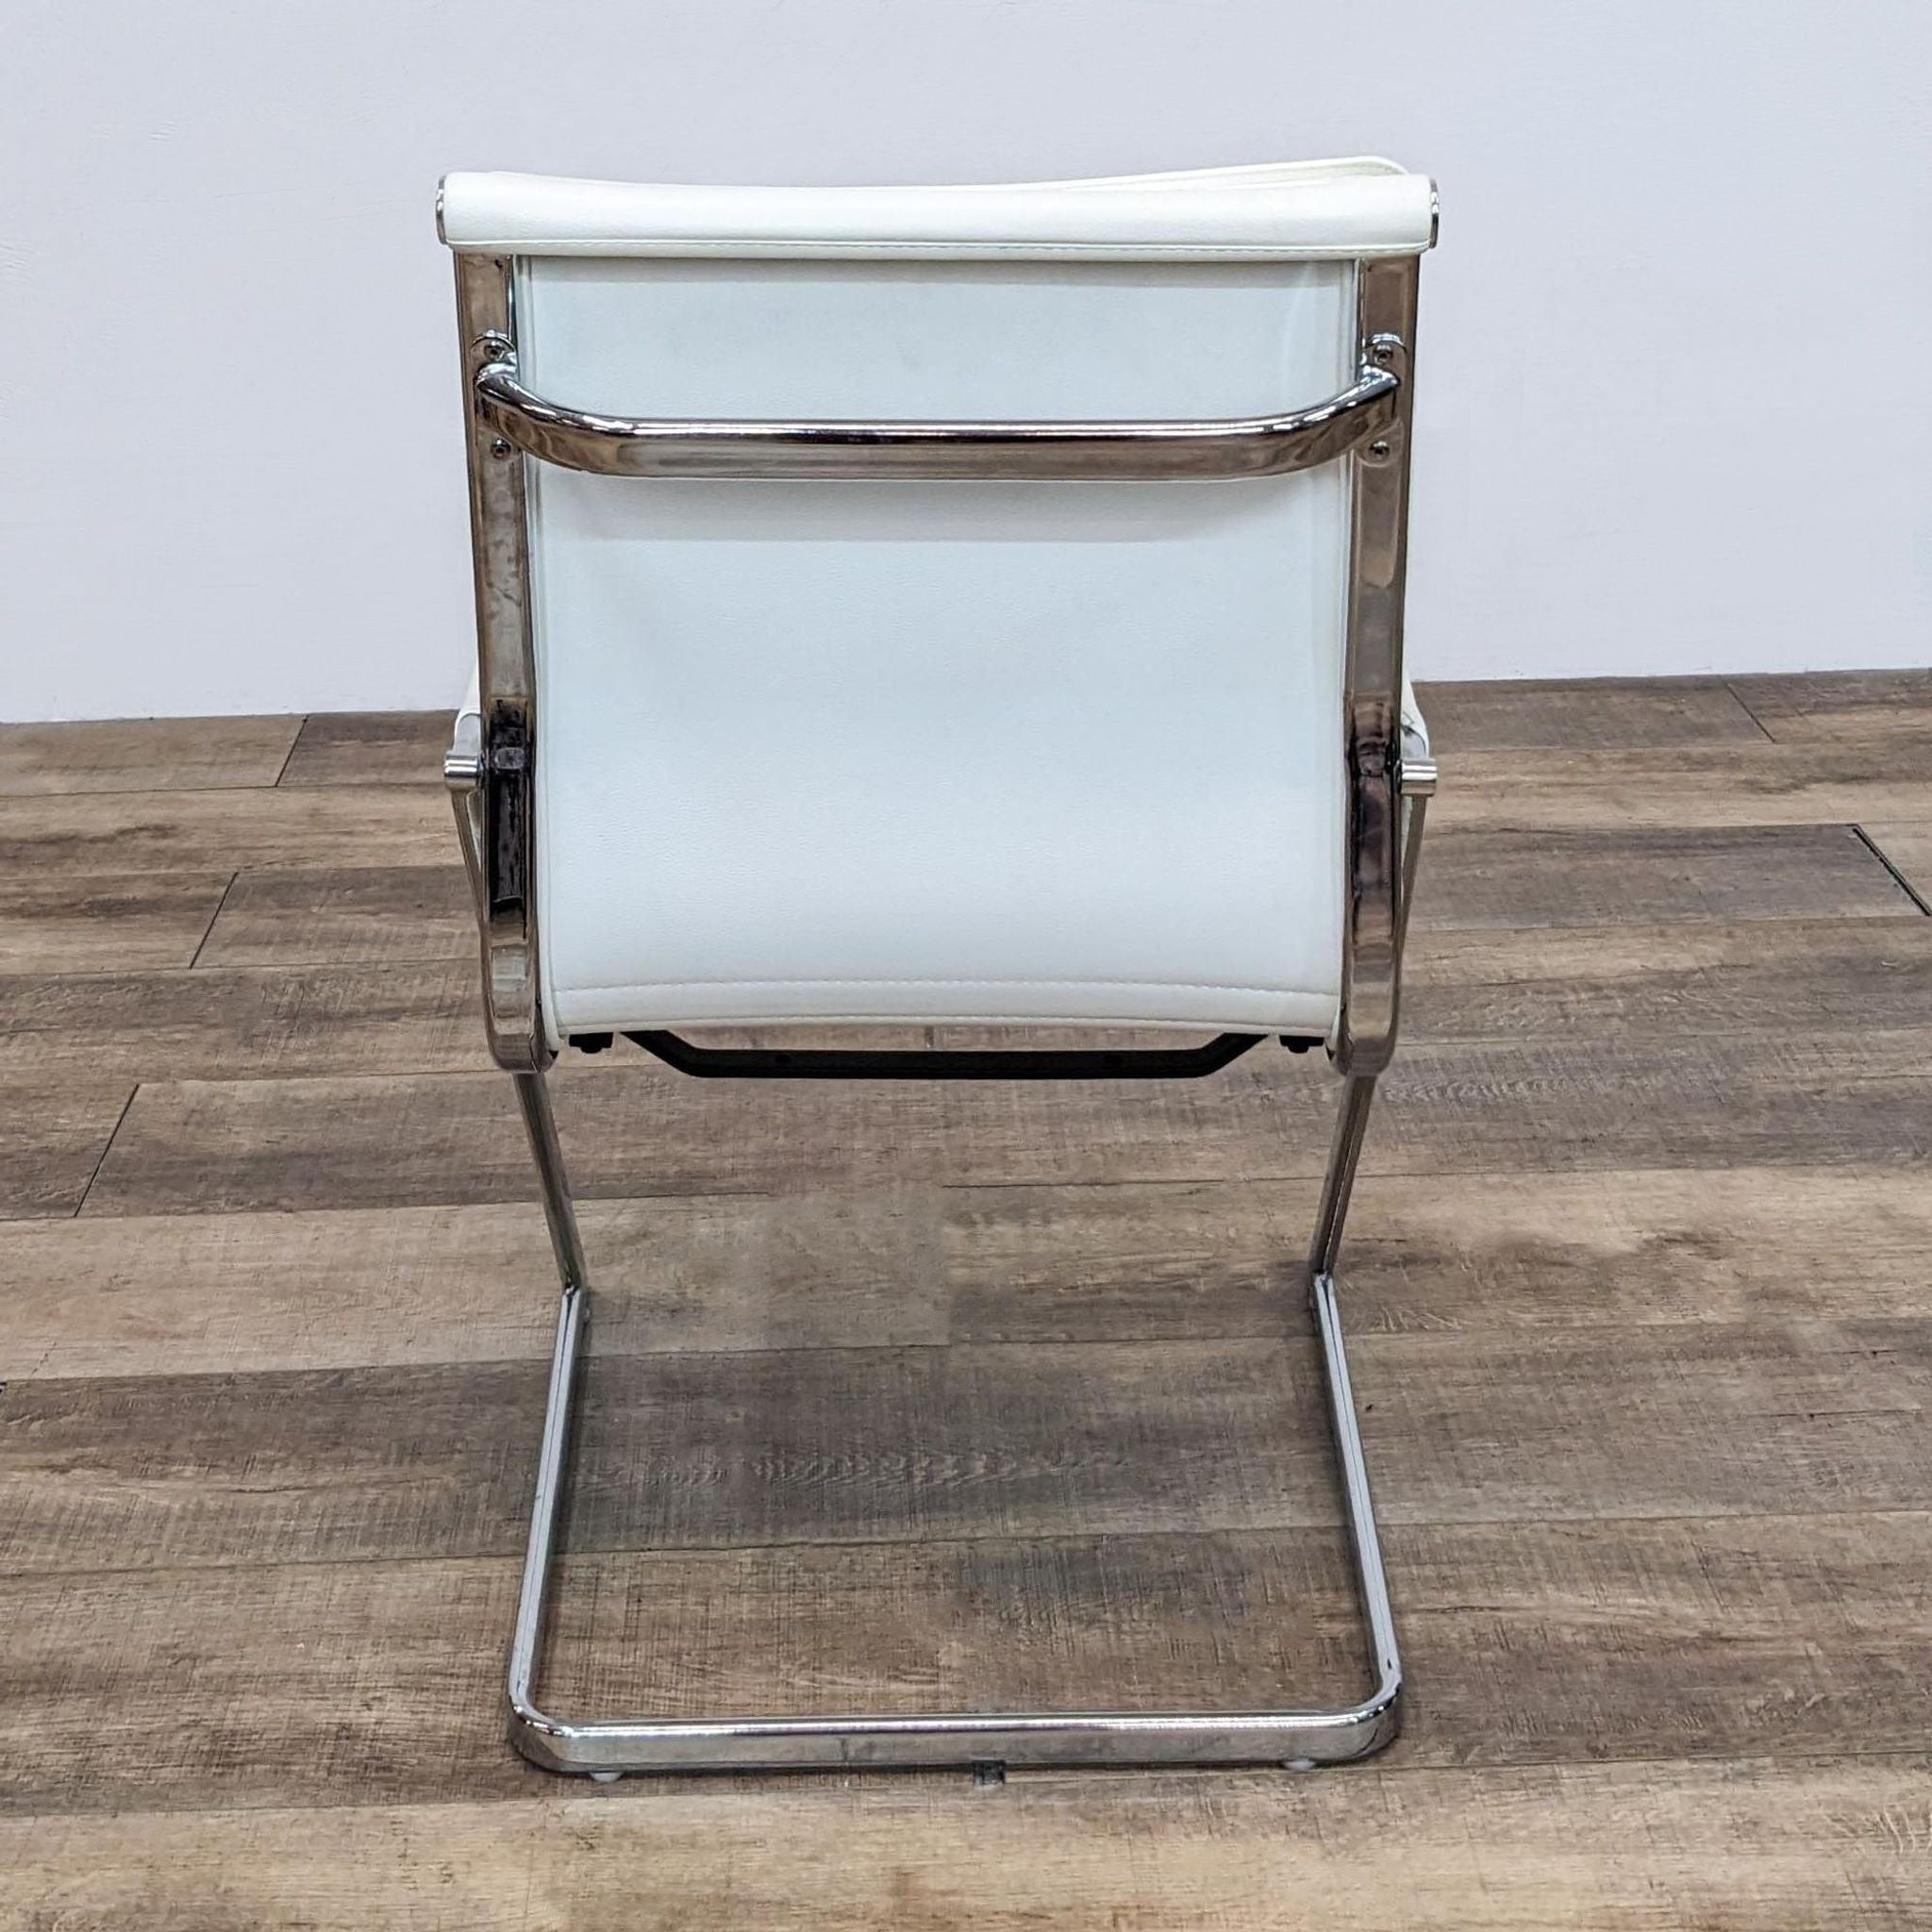 Zuo Modern brand chair with a white cushioned seat and backrest, featuring a chrome frame, displayed on a wooden floor.